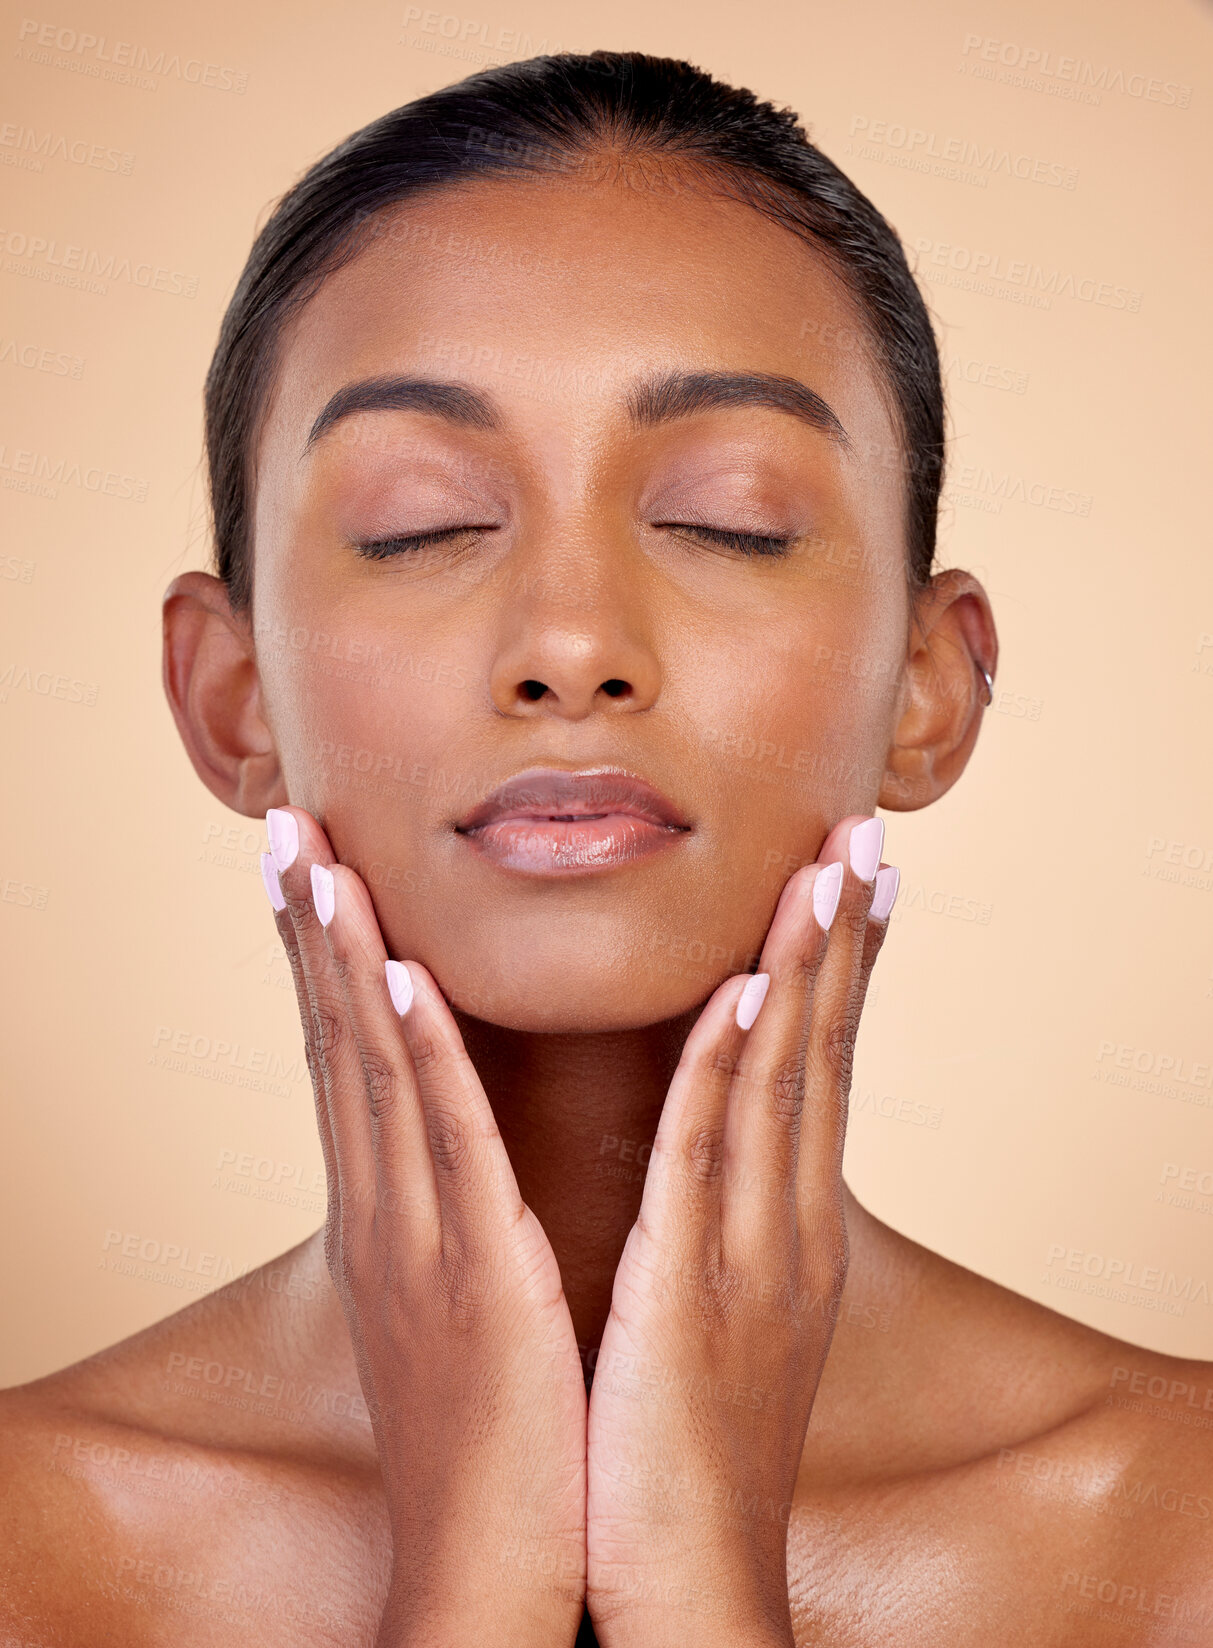 Buy stock photo Relax, skincare or natural woman with wellness, beauty or facial glow with dermatology cosmetics in studio. Hands, background or face of Indian girl model resting with shine, eyes closed or self love